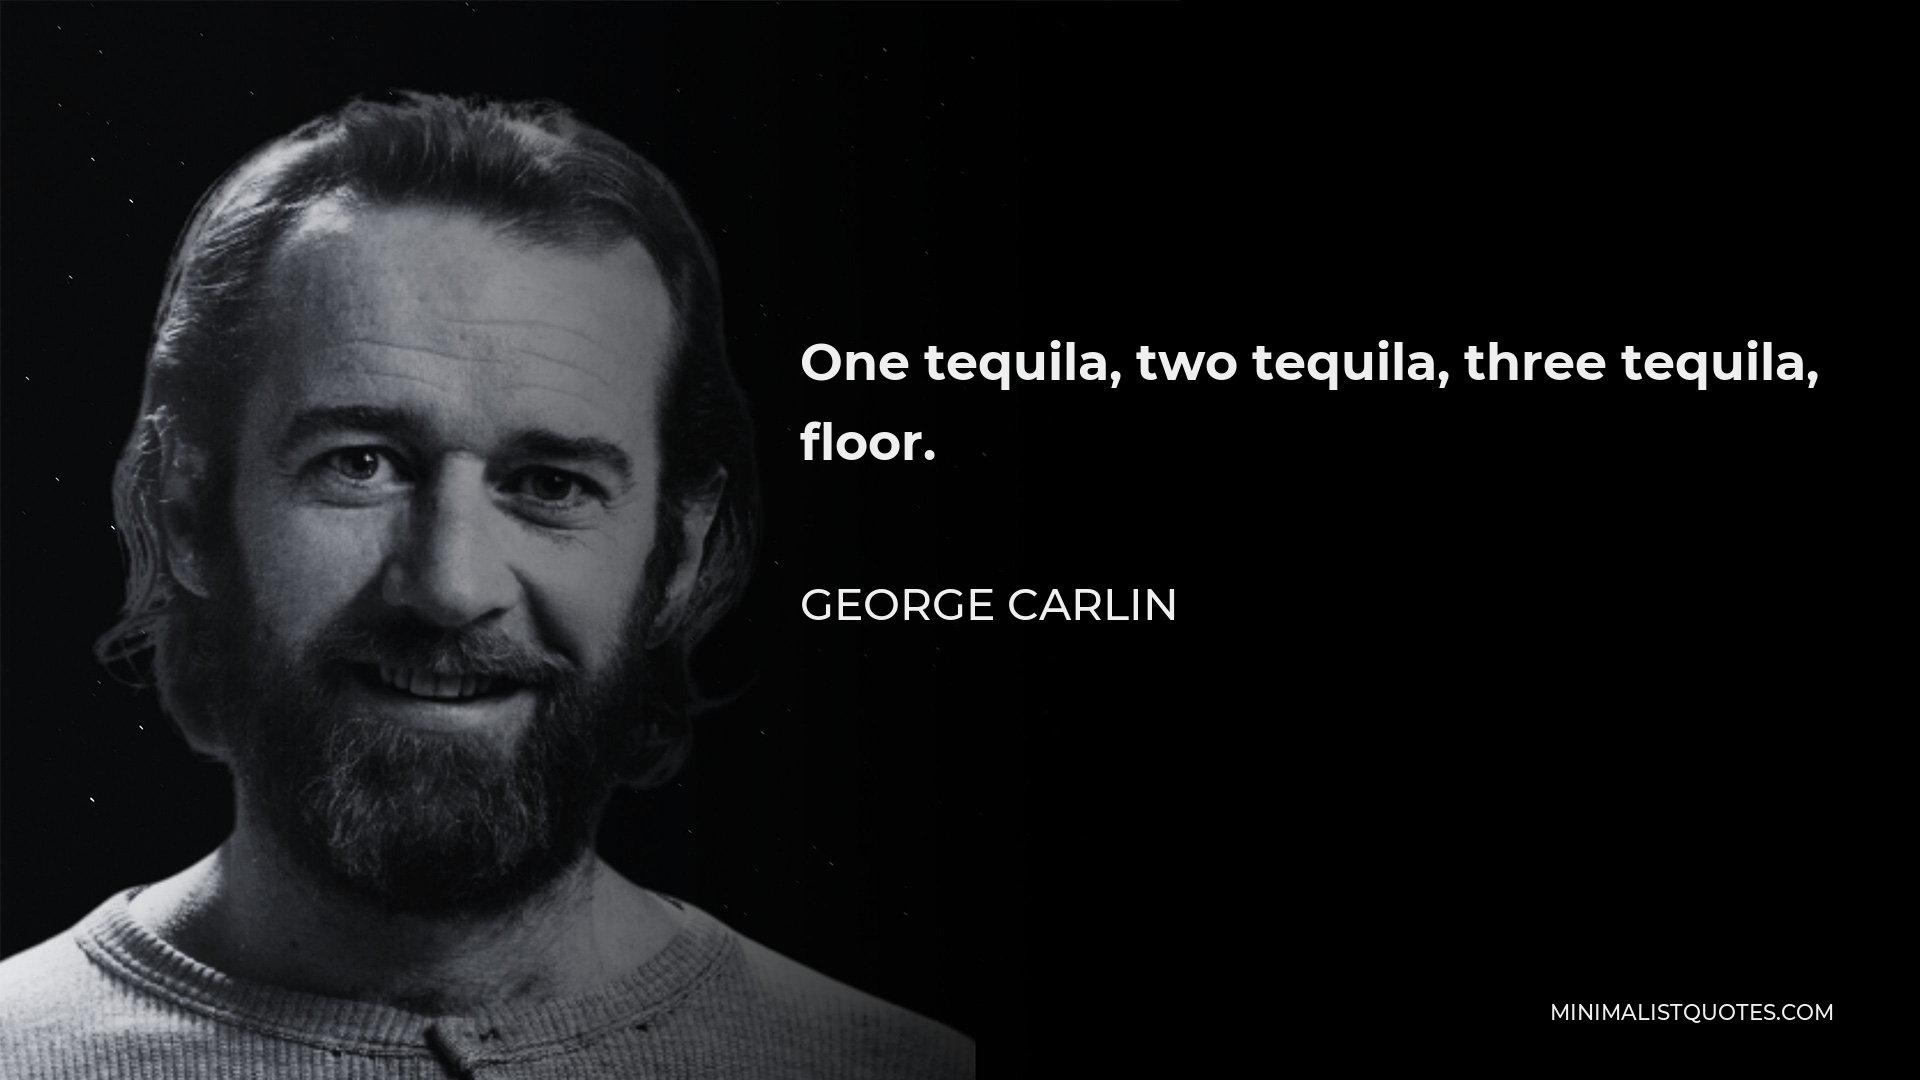 George Carlin Quote - One tequila, two tequila, three tequila, floor.